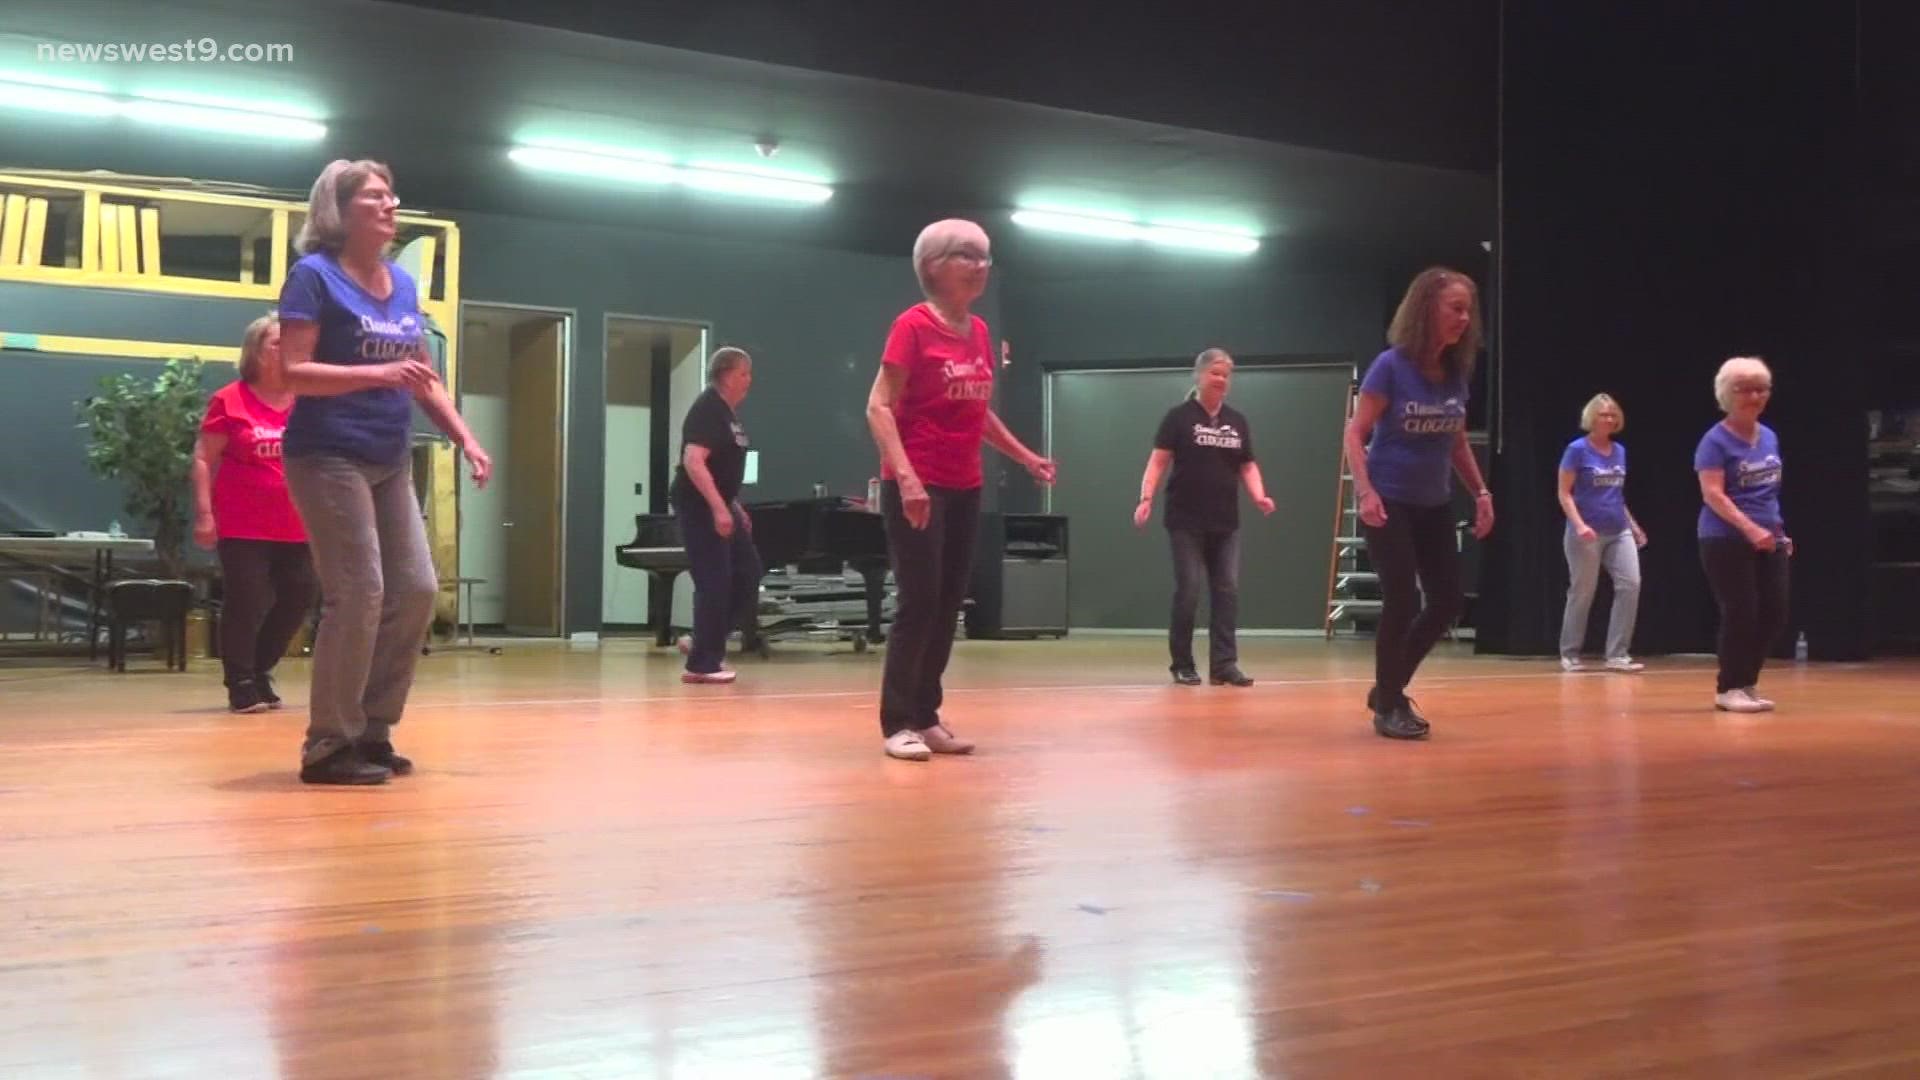 Tori Baca has been teaching clogging with Midland College for 10 years. In those years, she's taught groups of students who's ages range from 60 -79 years old.